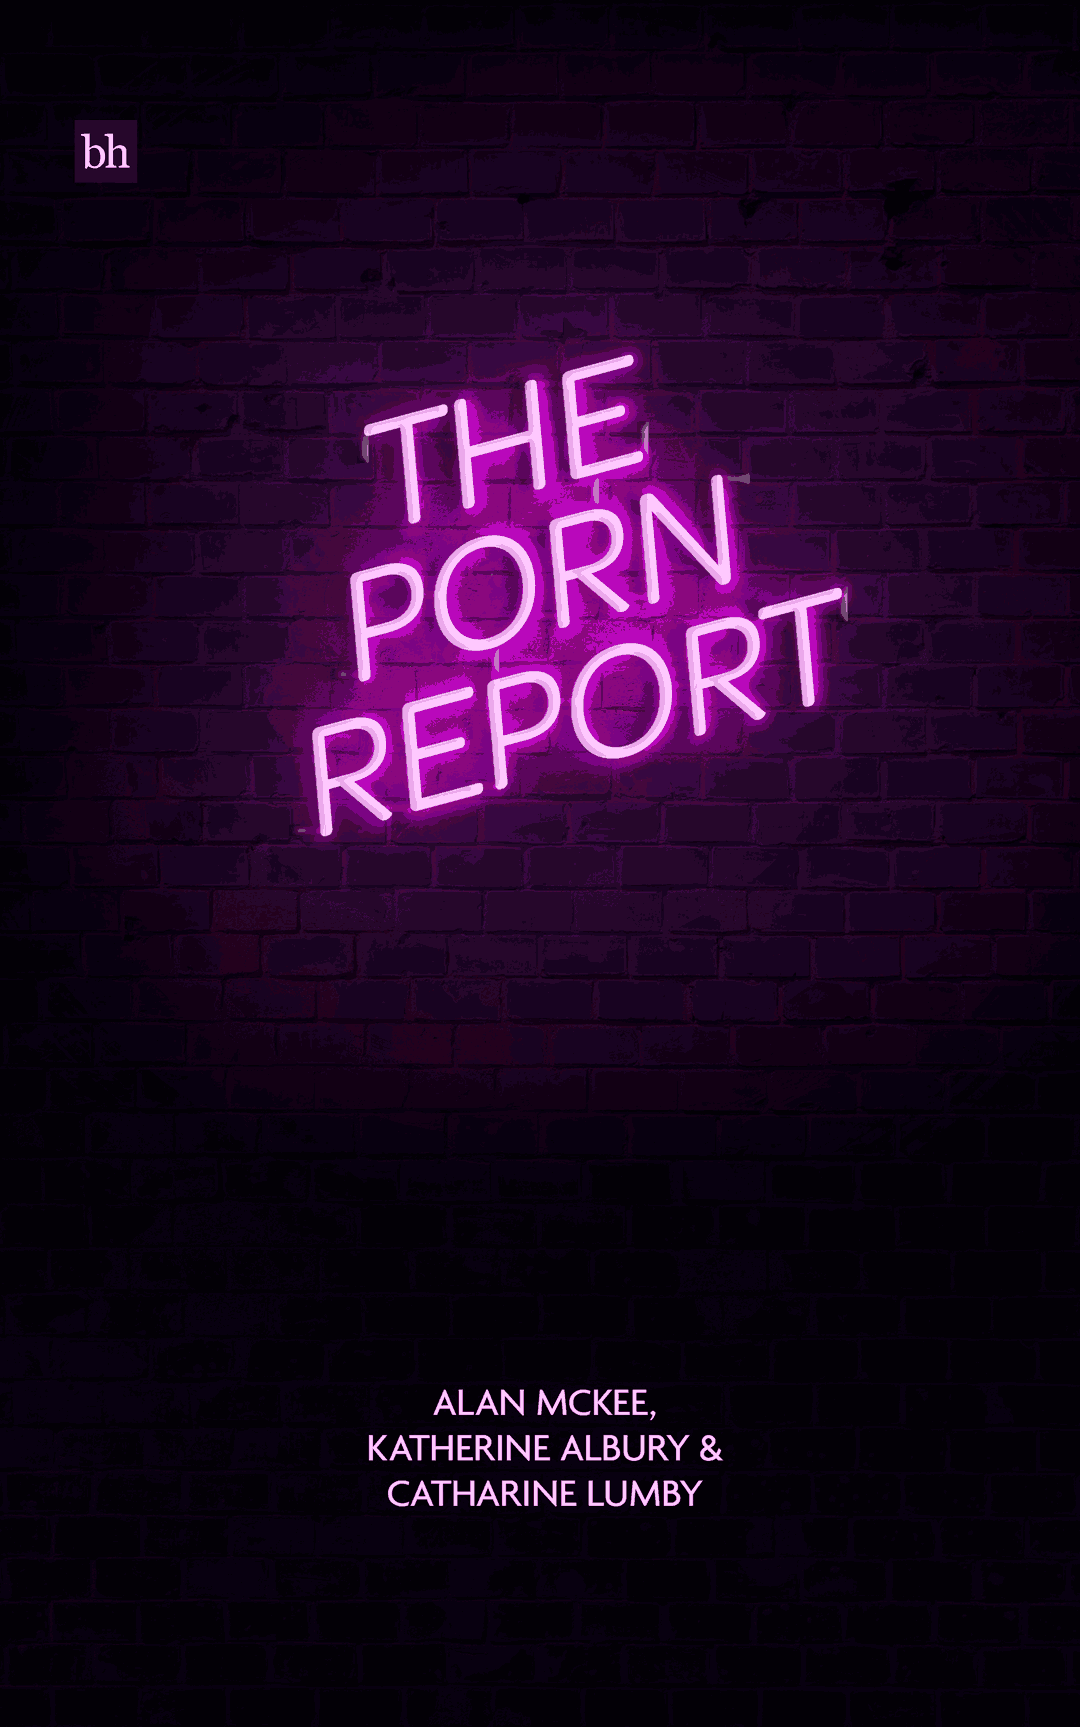 The Porn Report by Alan McKee, Katherine Albury and Catharine Lumby